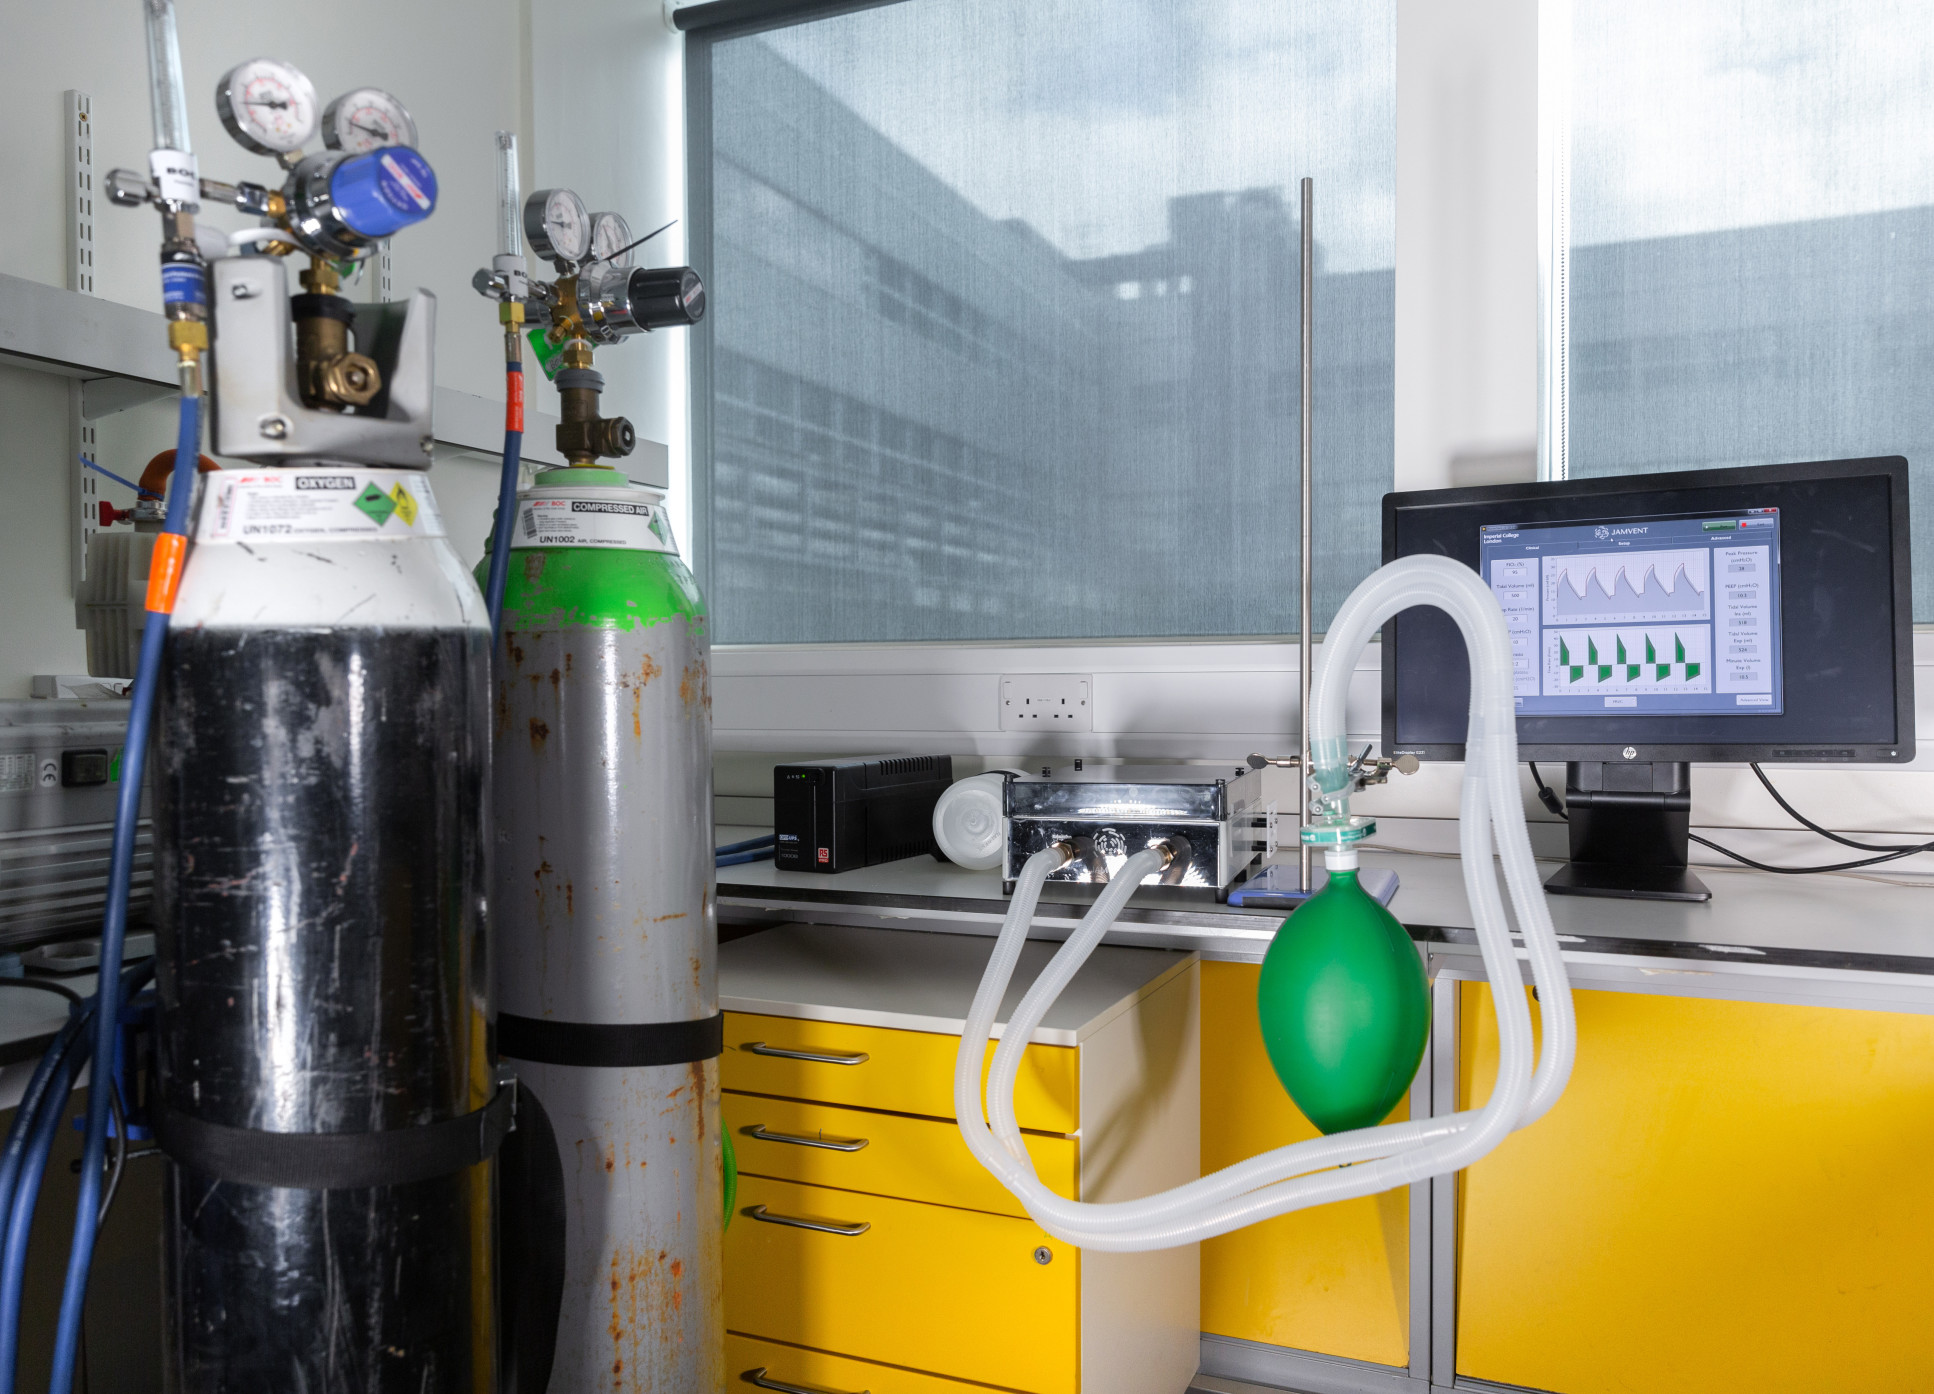 Photo showing the ventilator in the lab